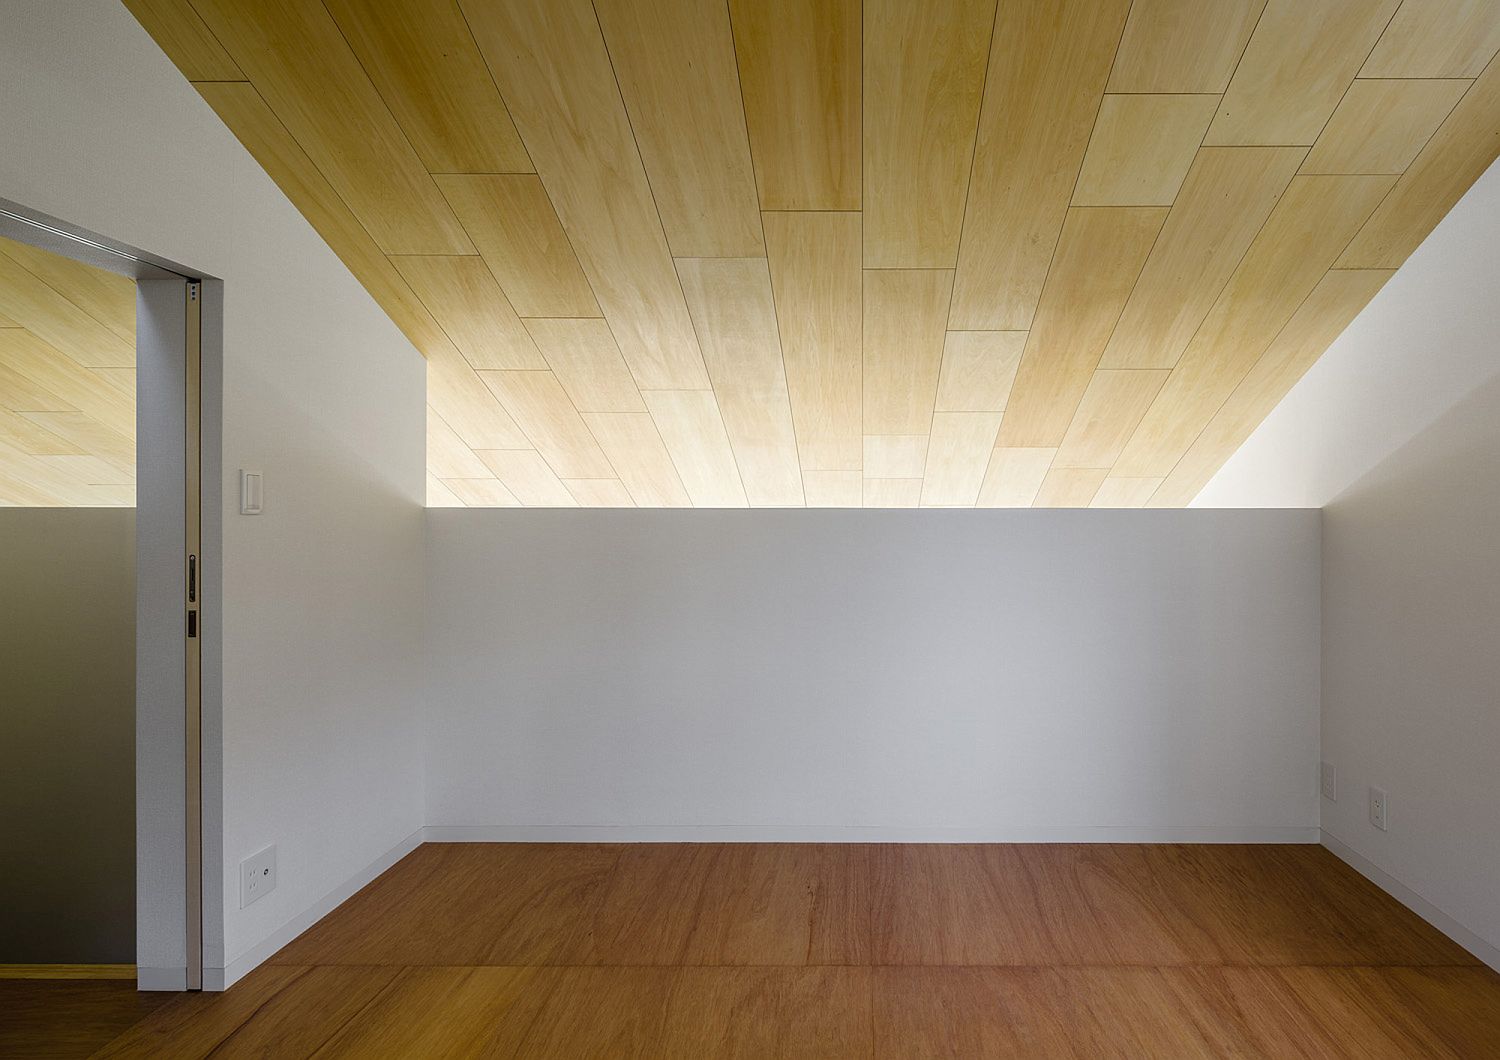 Top level of the Administrative House in Japan with ample natural light